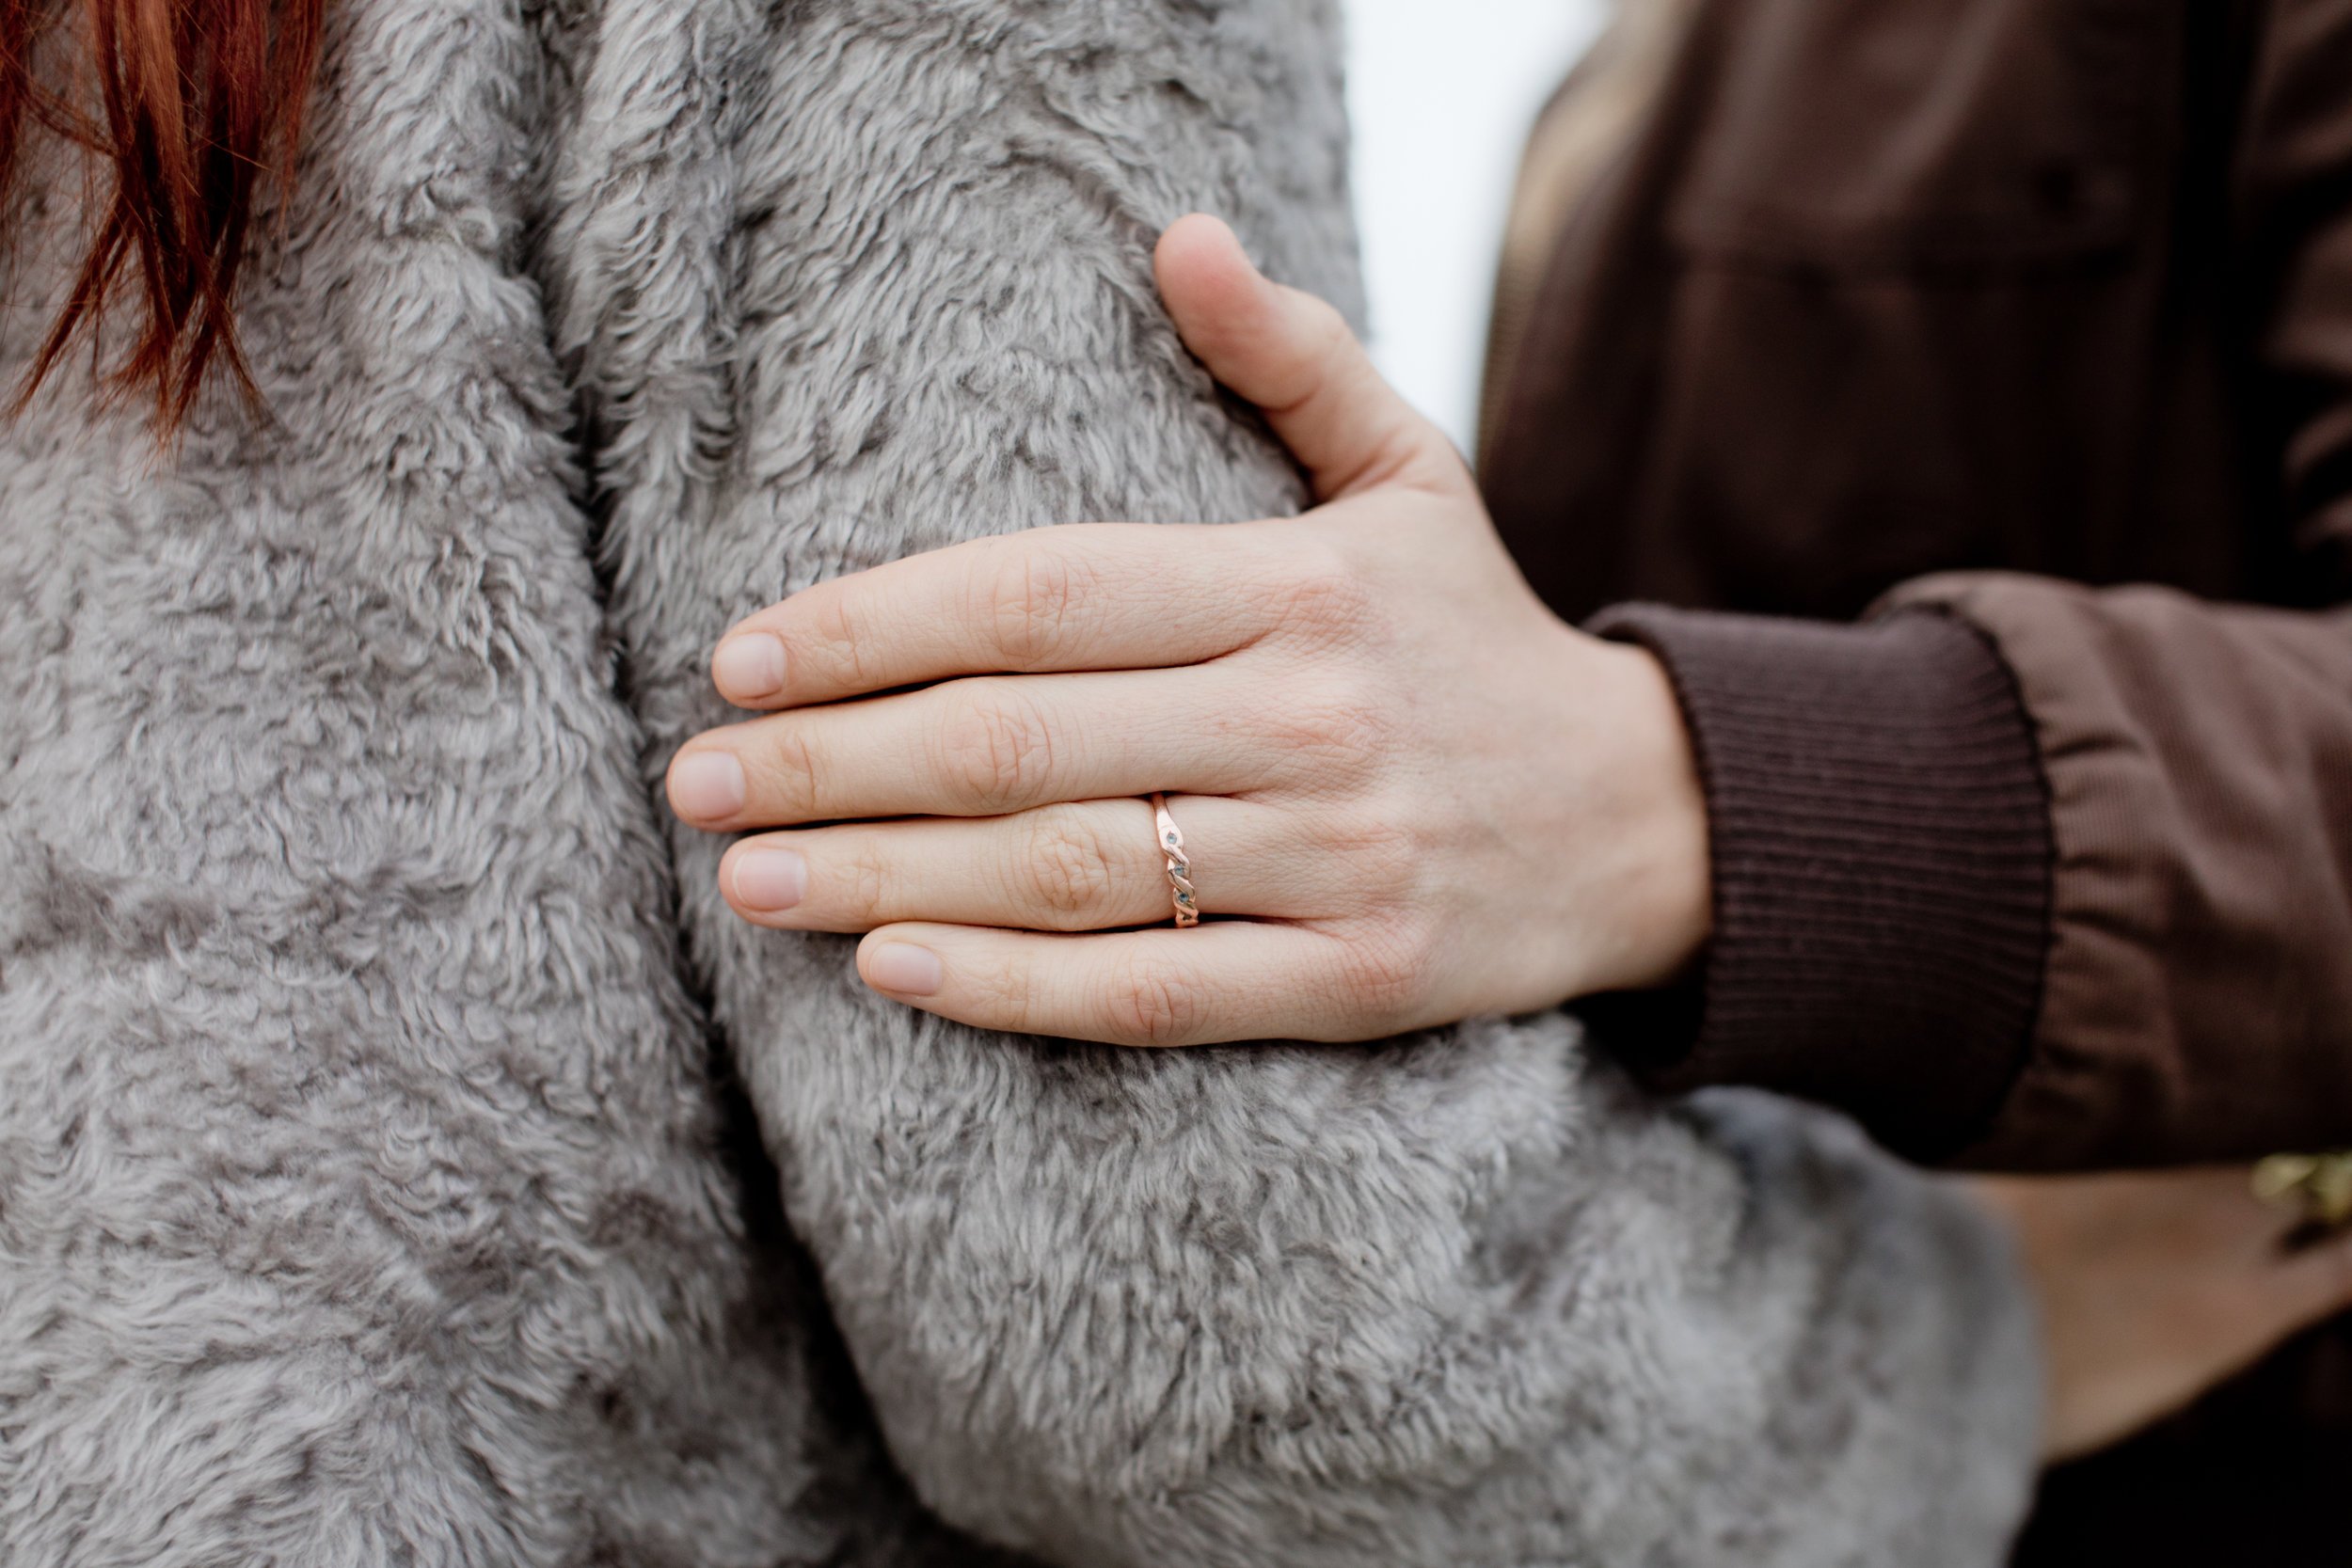 Close up of ring on women's hand, holding onto the arm of her partner